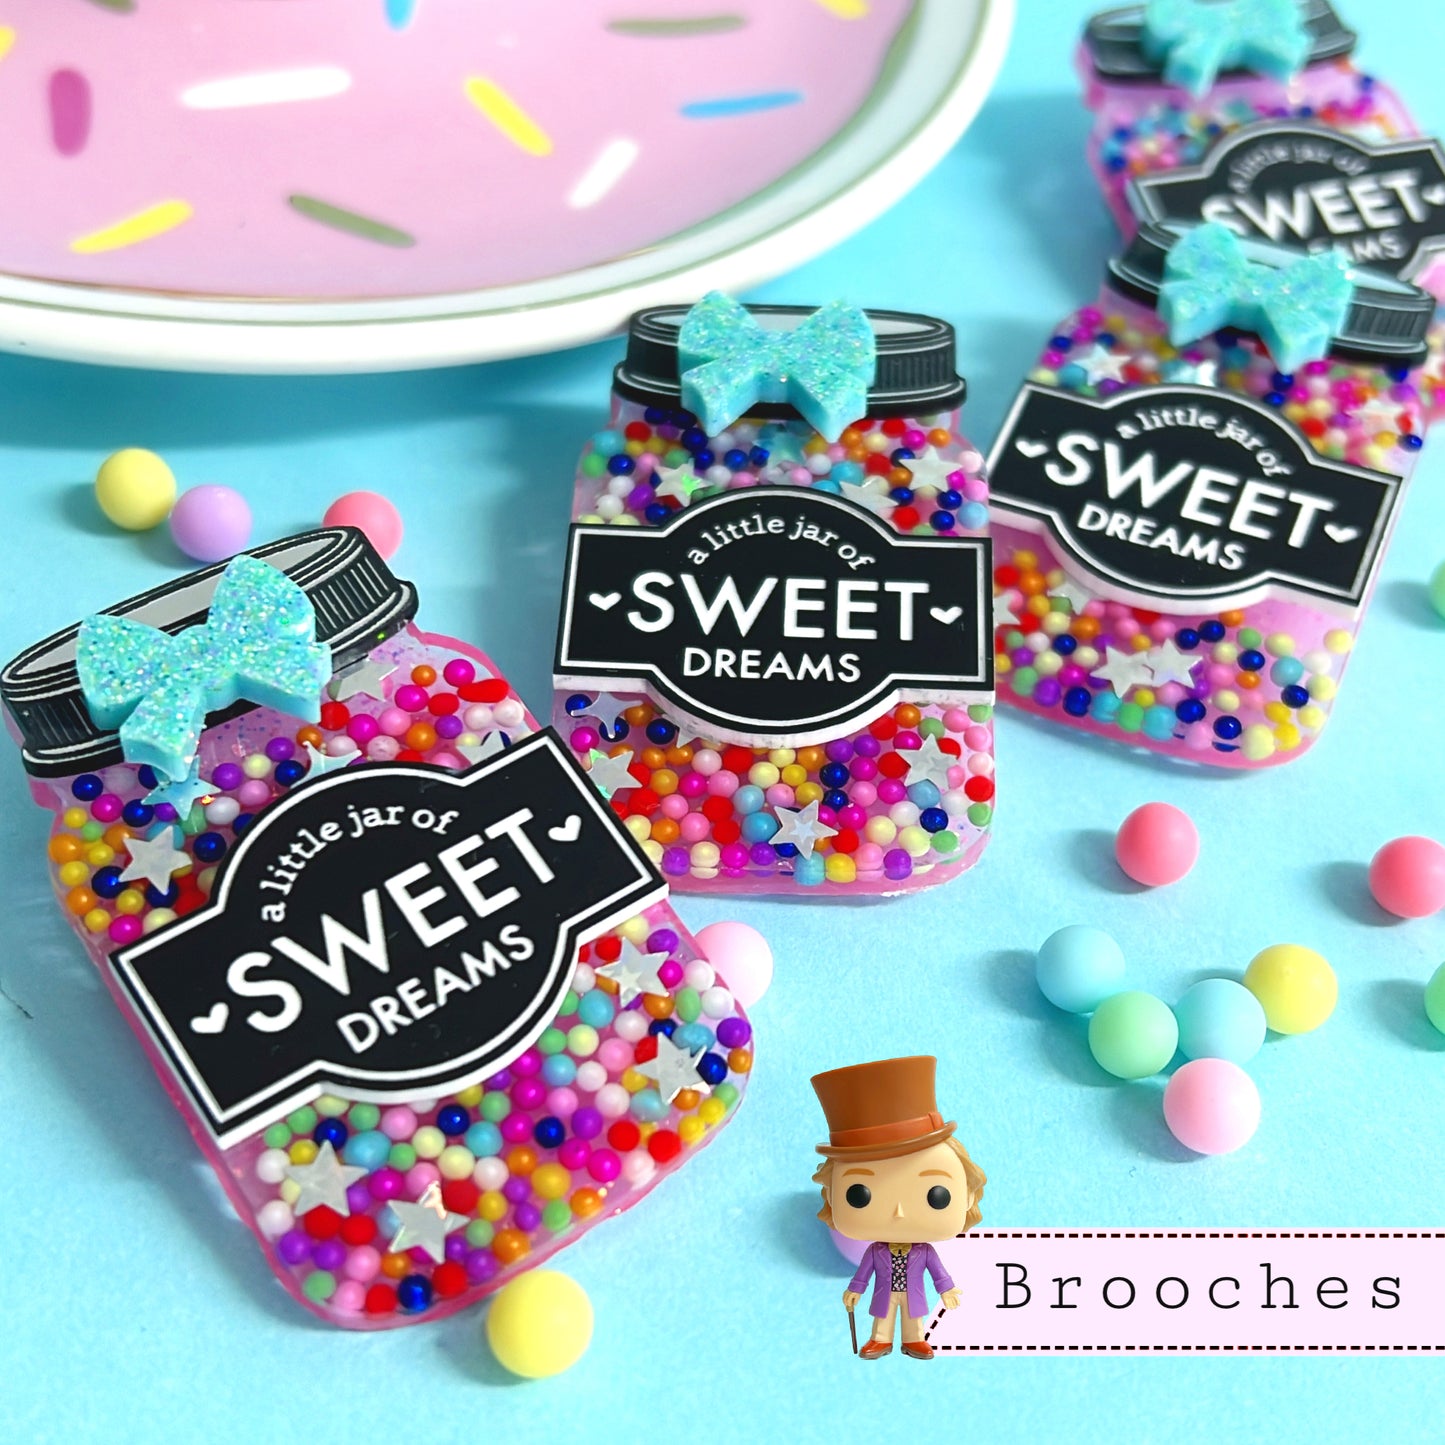 THE DREAMERS OF DREAMS : A LITTLE JAR OF SWEET DREAMS : CANDY : Handmade Resin & Acrylic BROOCH